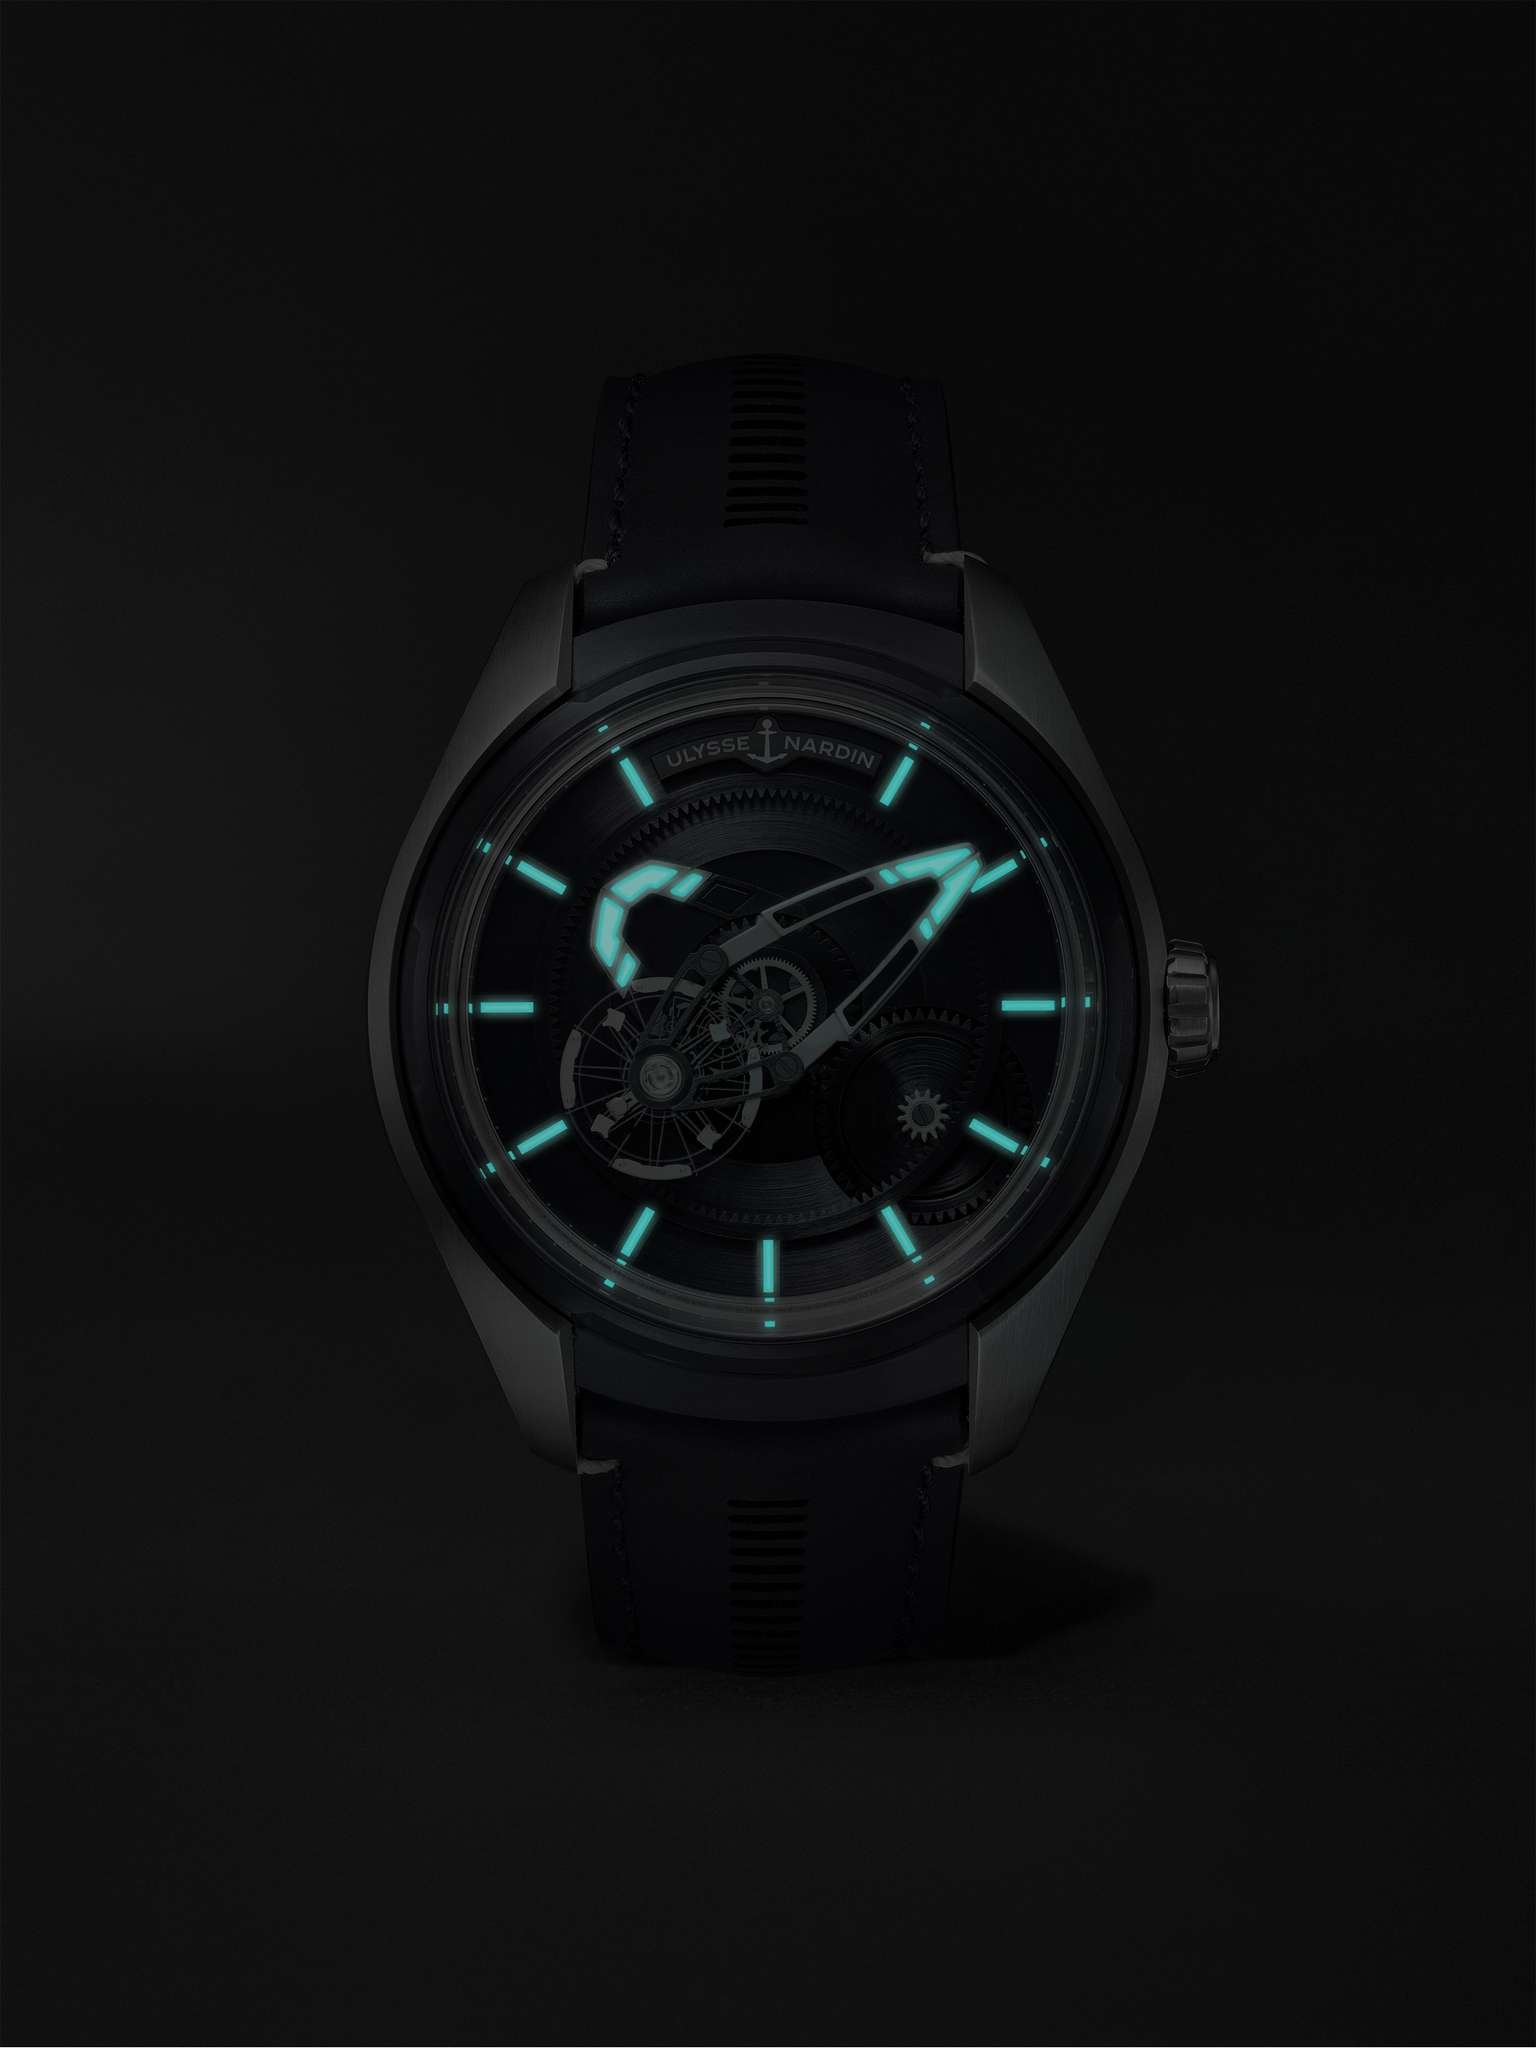 Freak X Automatic 43mm Titanium and Leather Watch, Ref. No. 2303-270.1/03 - 10